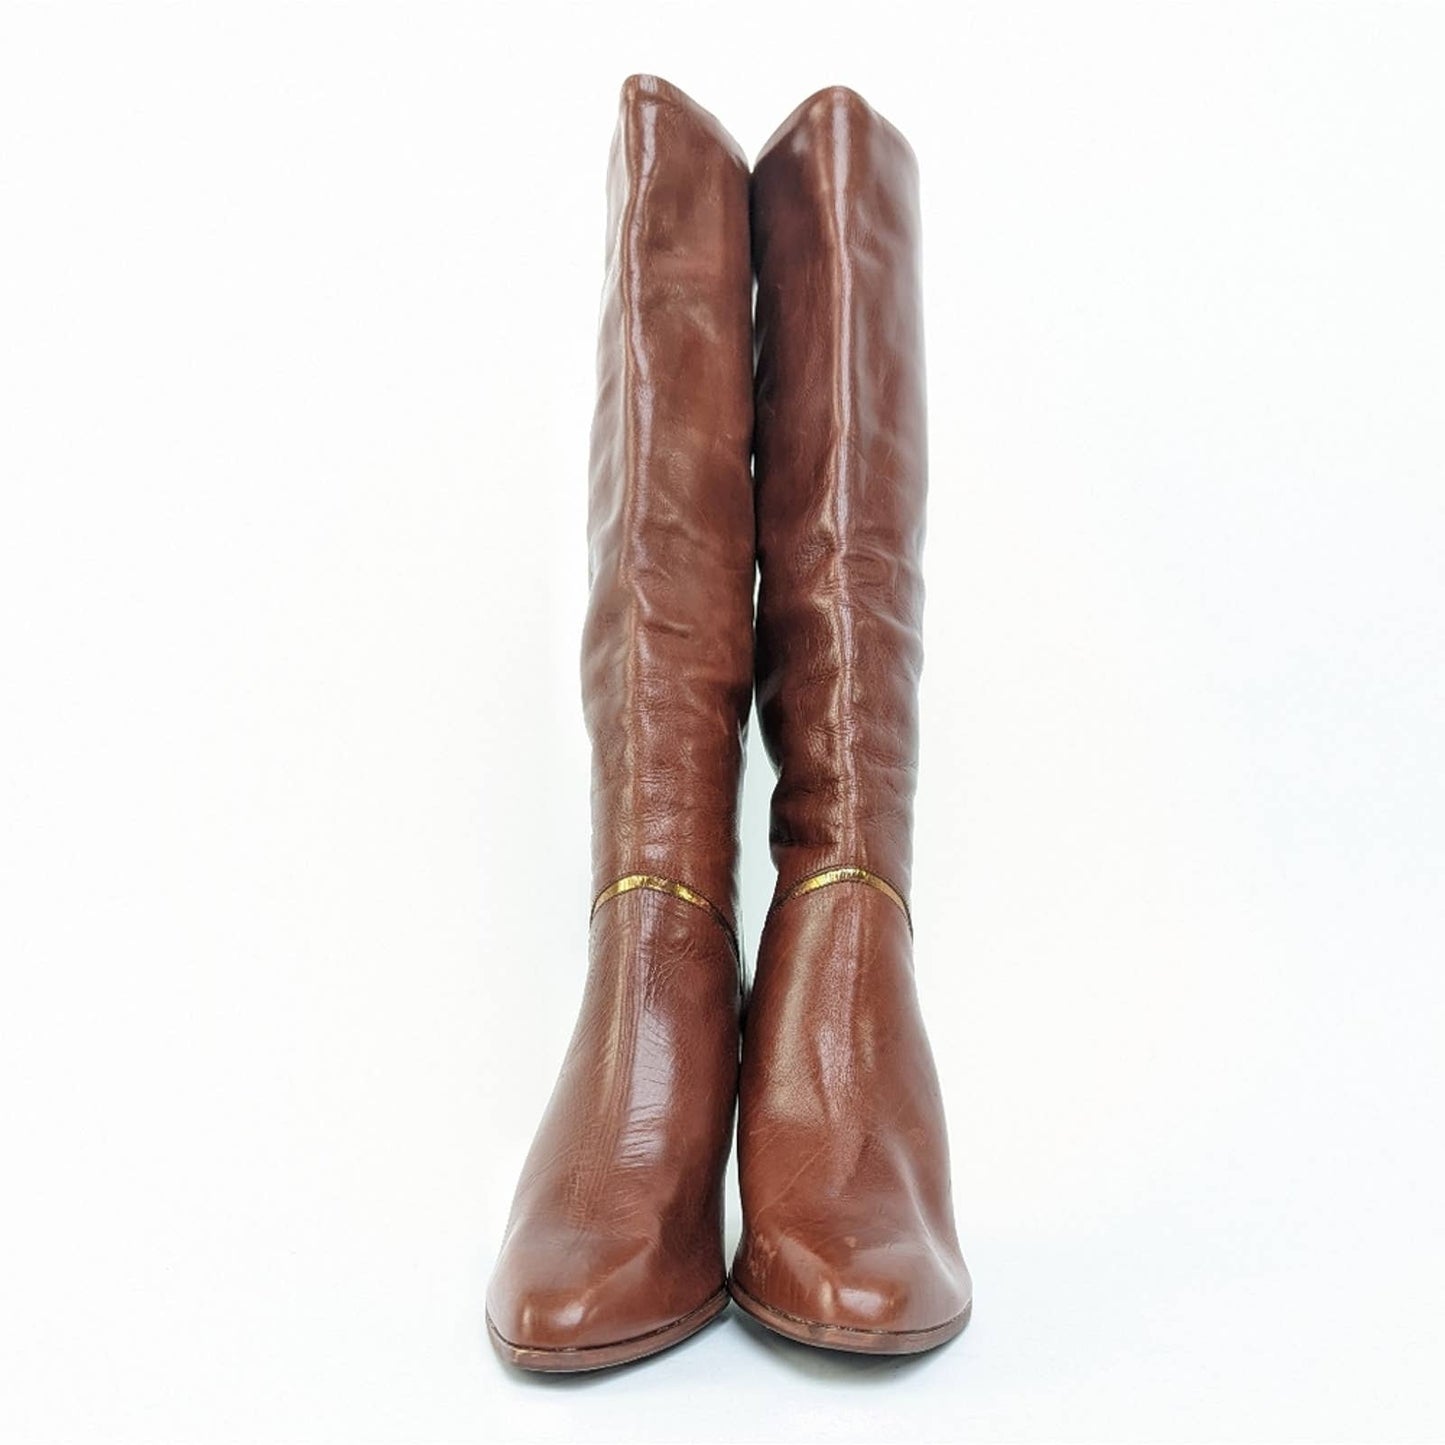 Nickels NWOT Soft Leather Knee High Riding Boots - 7.5